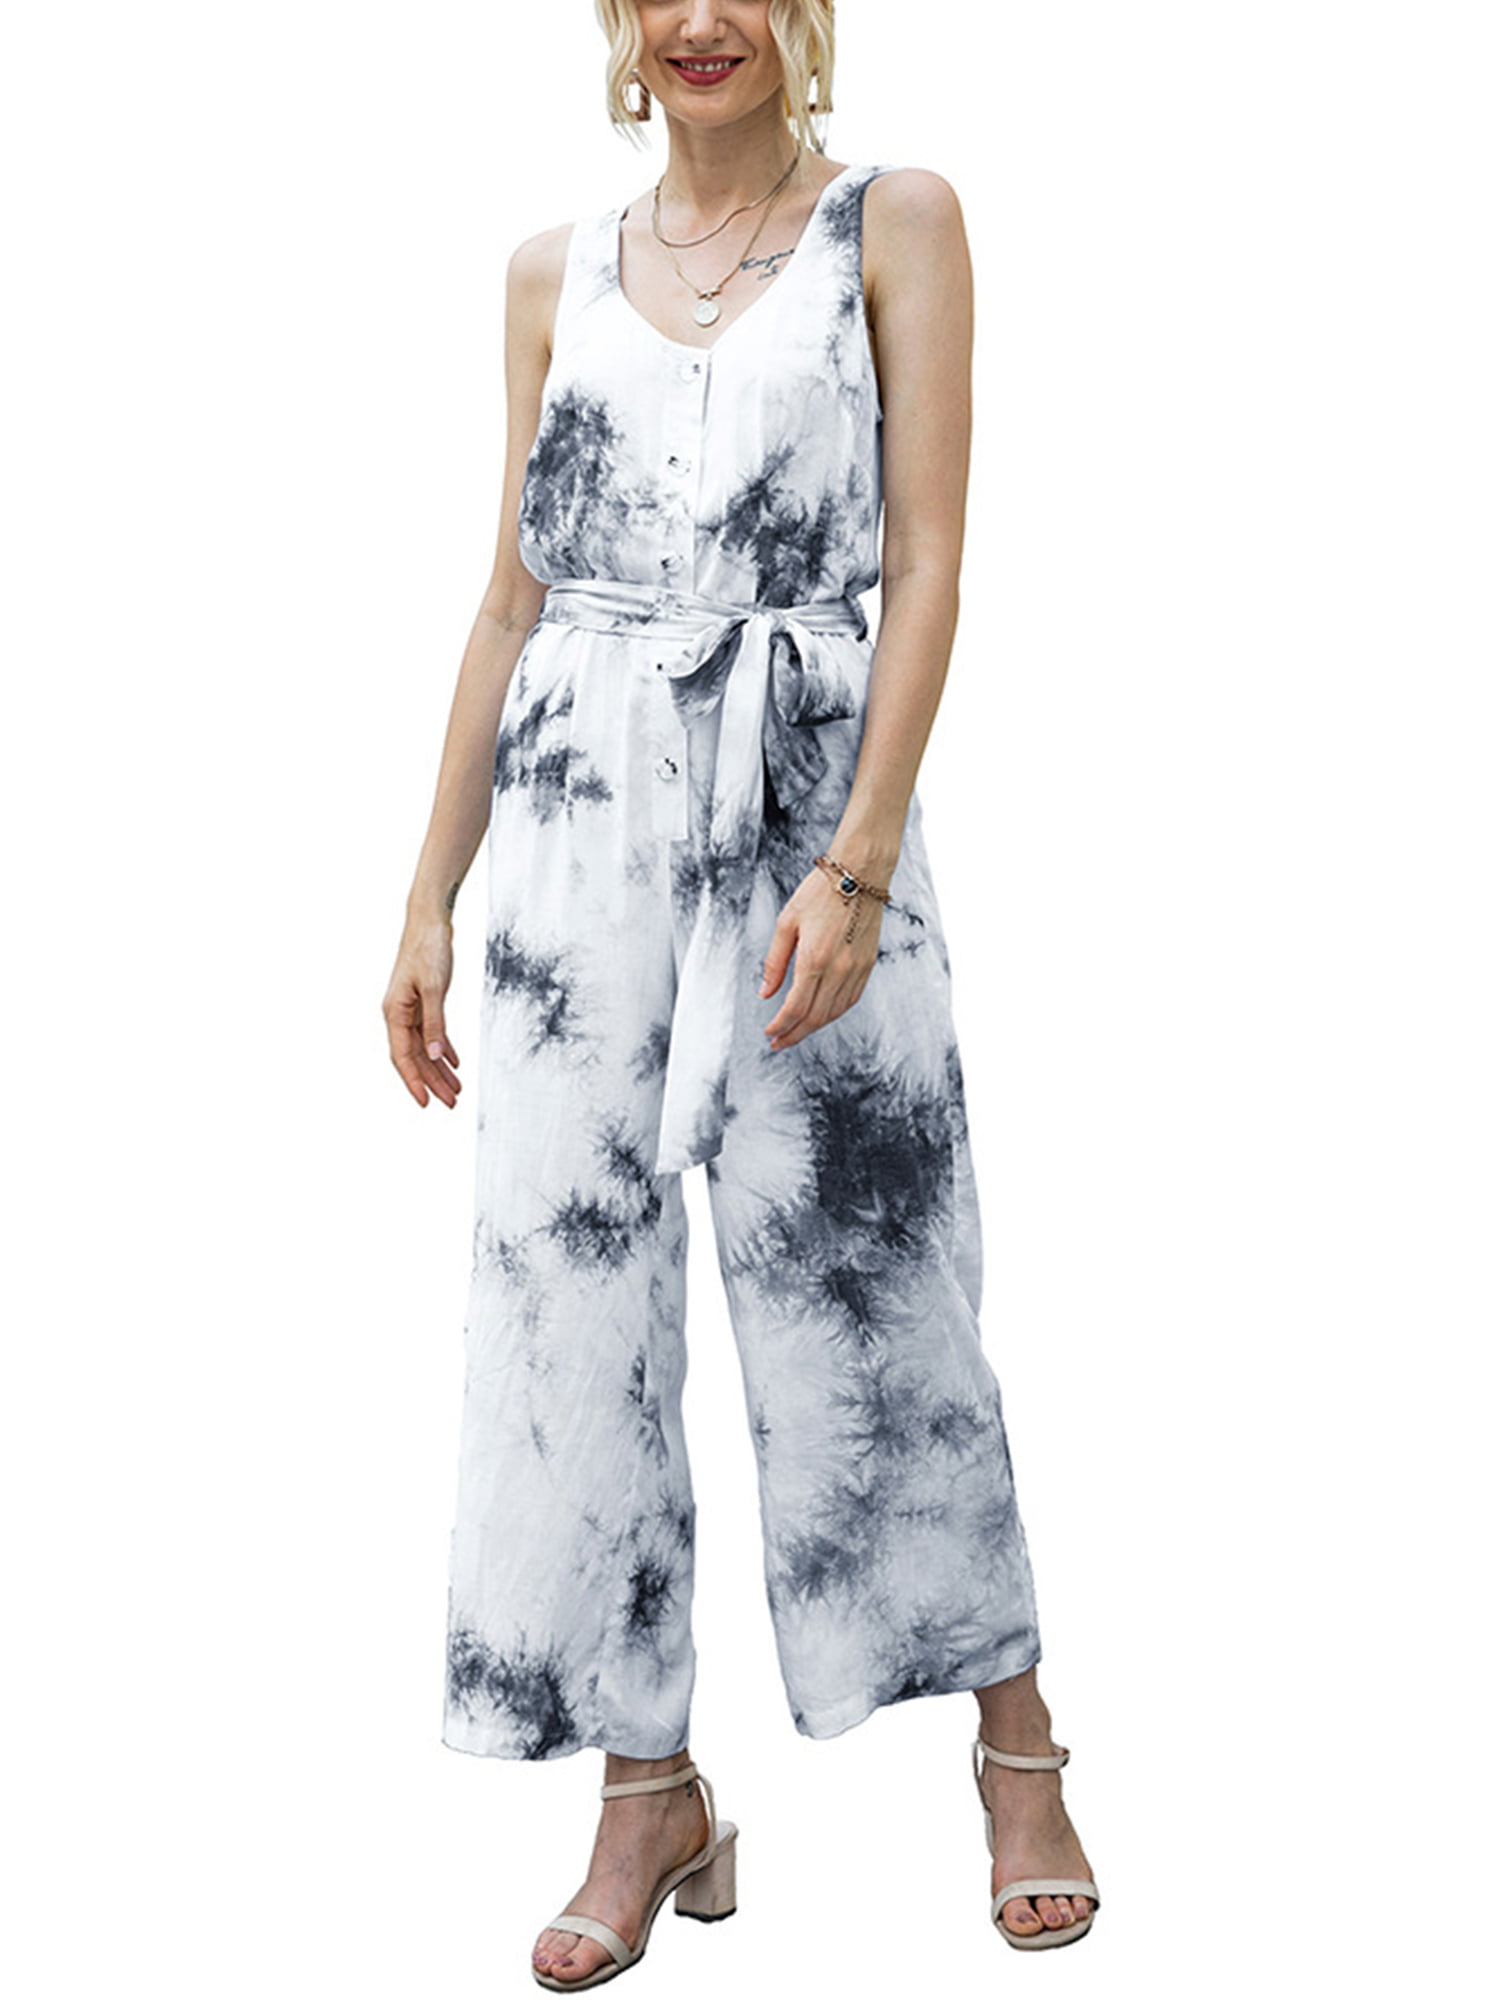 Lady Sleeveless Loose Wide Leg Jumpsuit Overalls Summer Casual Trousers Romper 